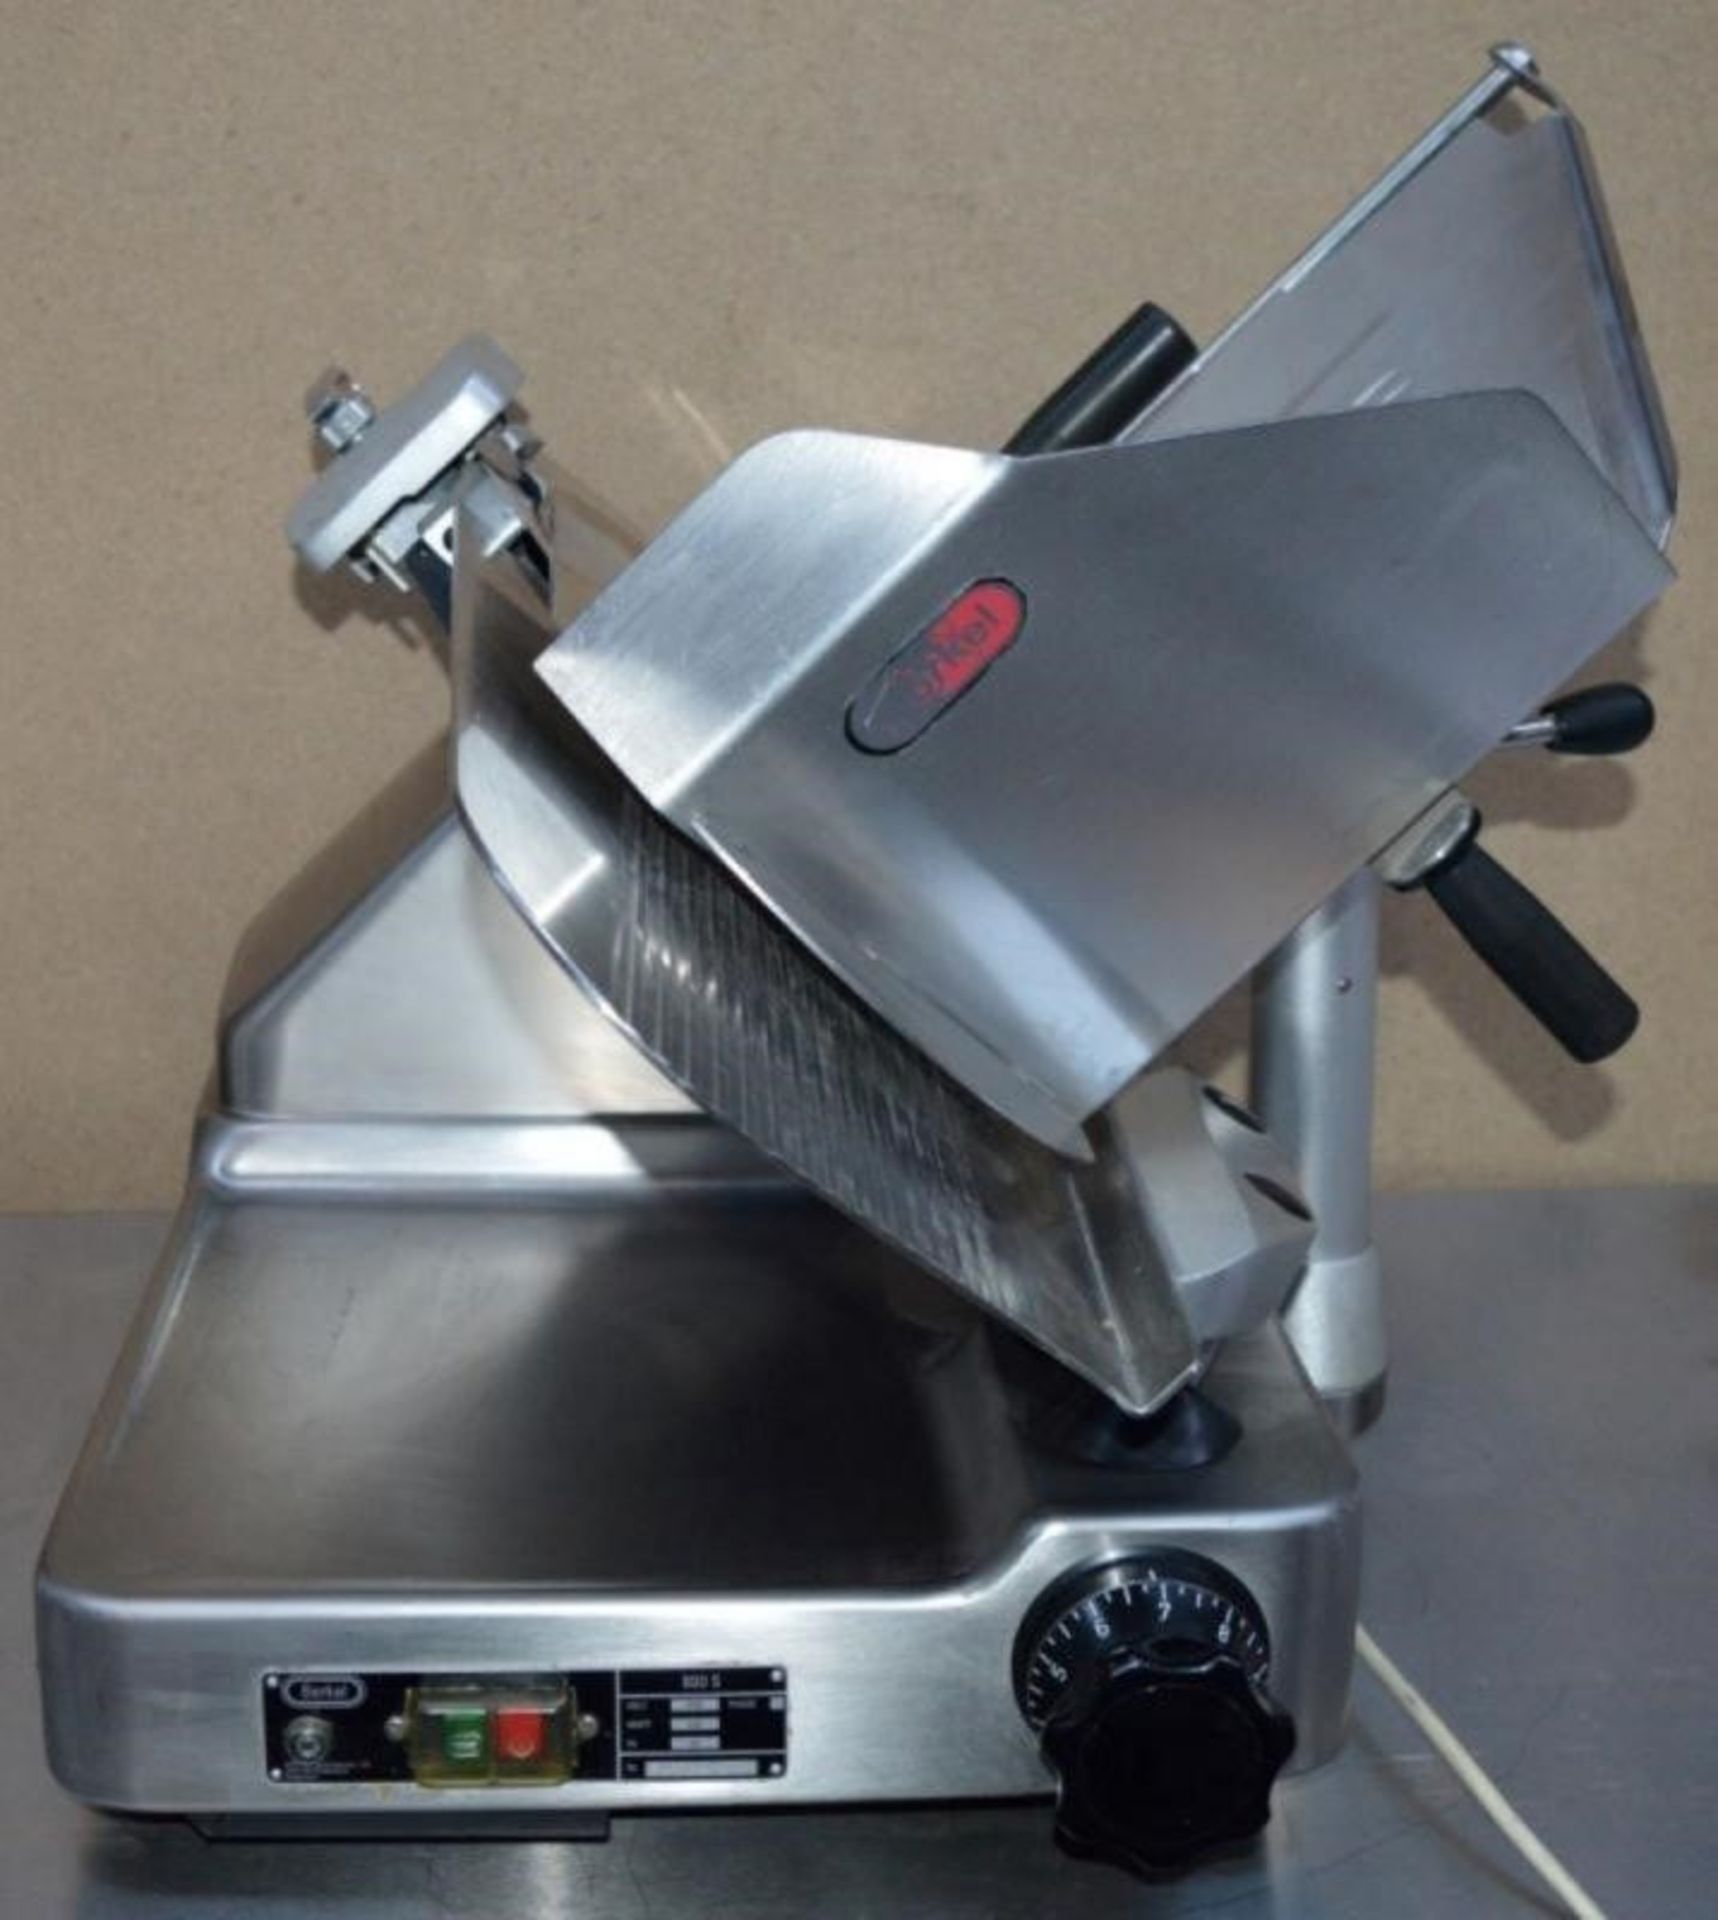 1 x Berkel 800S 12" Commercial Cooked Meat / Bacon Slicer - 220-240v - Dimensions H58 x W72 x D48 cm - Image 2 of 9